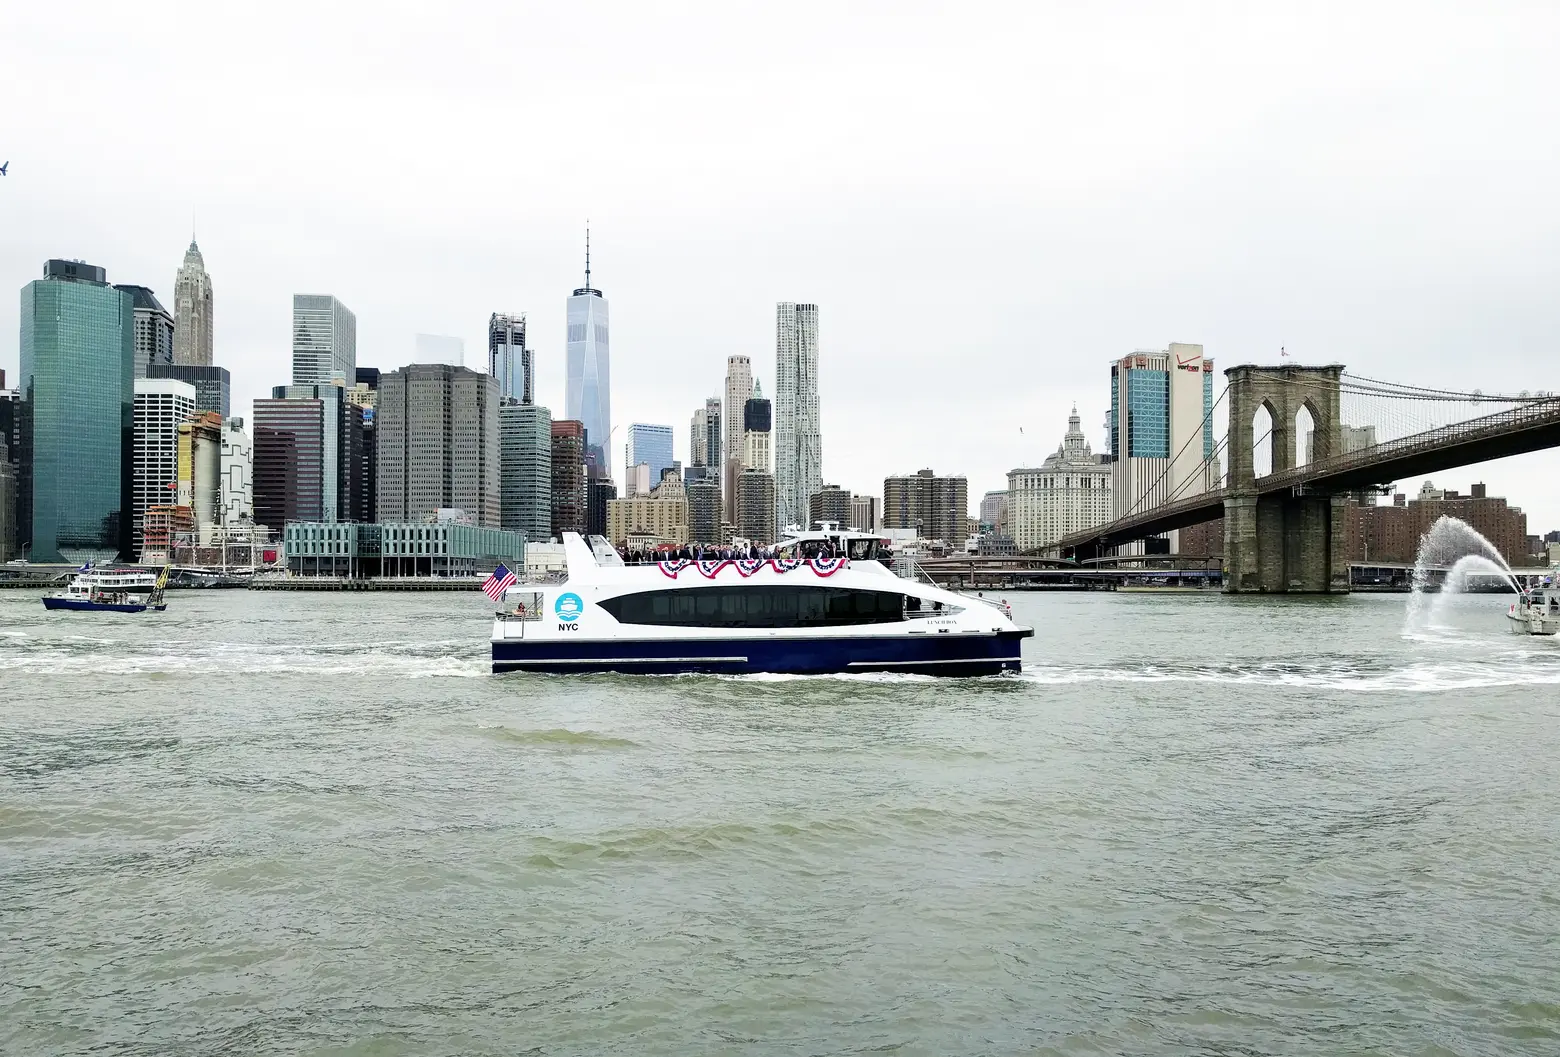 Ferry system costs NYC roughly $6.60 per passenger